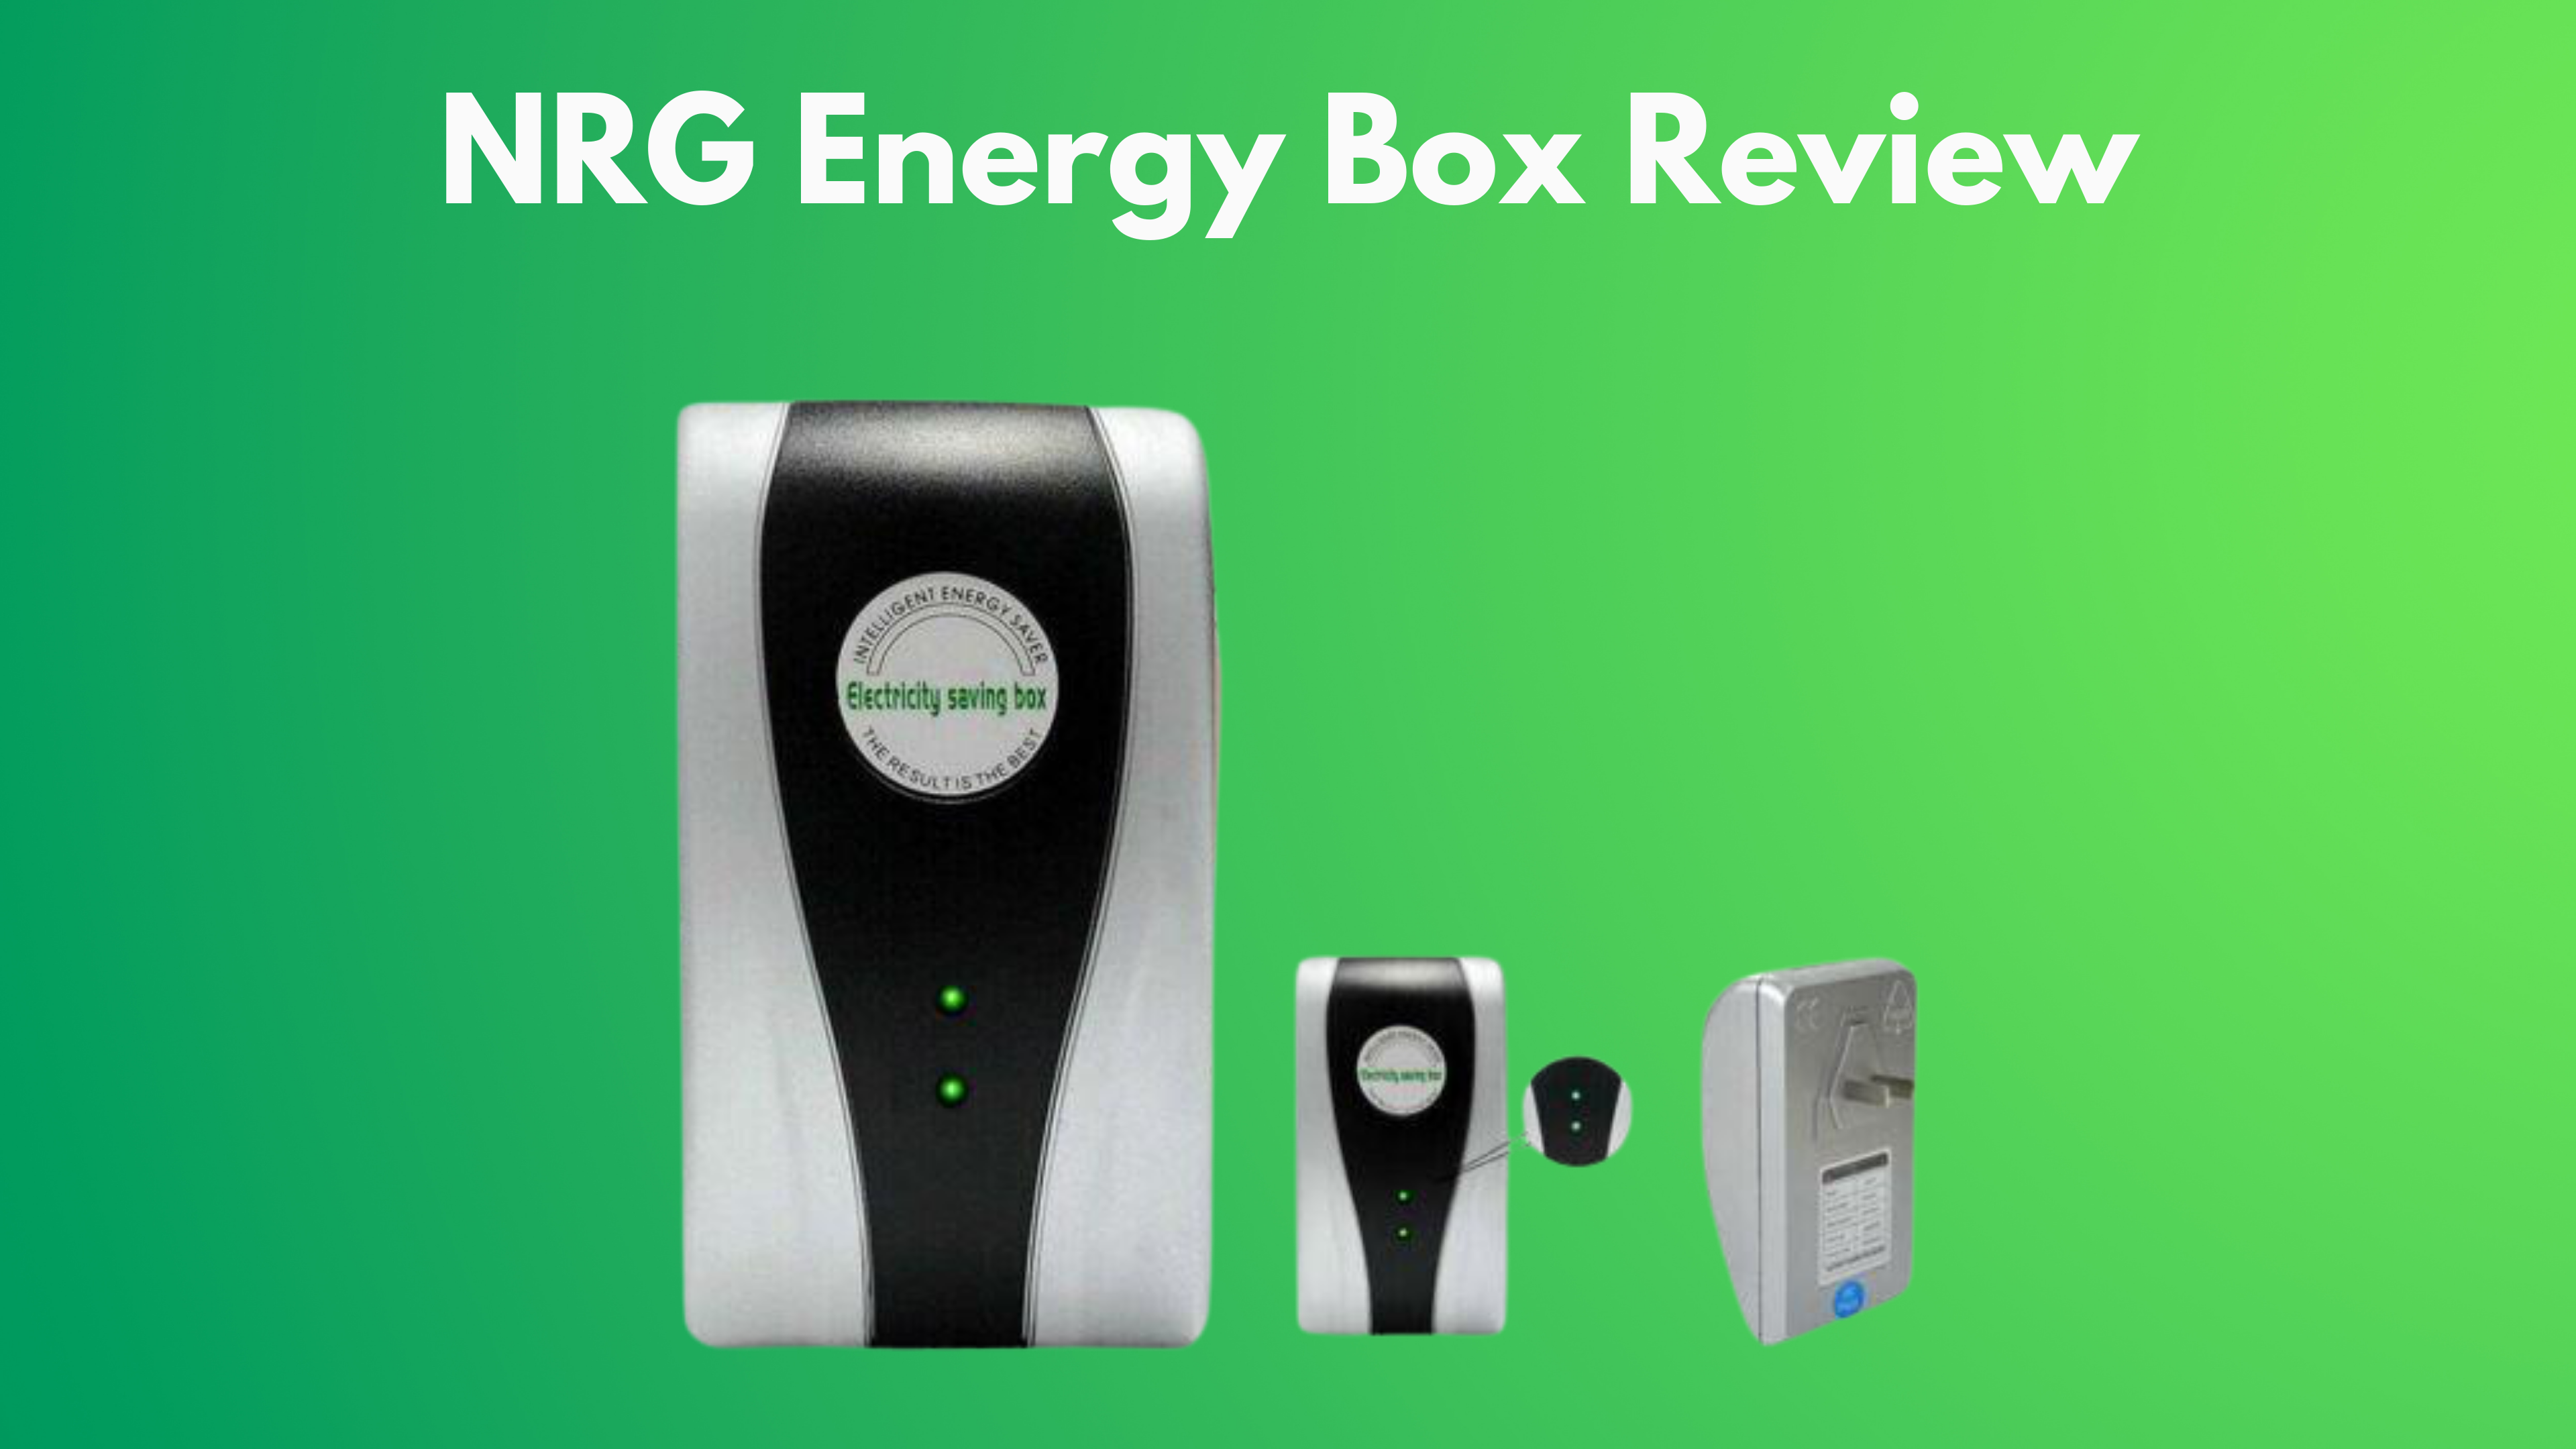 The NRG Power Saver Box Review: My Tried And True Method For Saving Money On Electric Bills